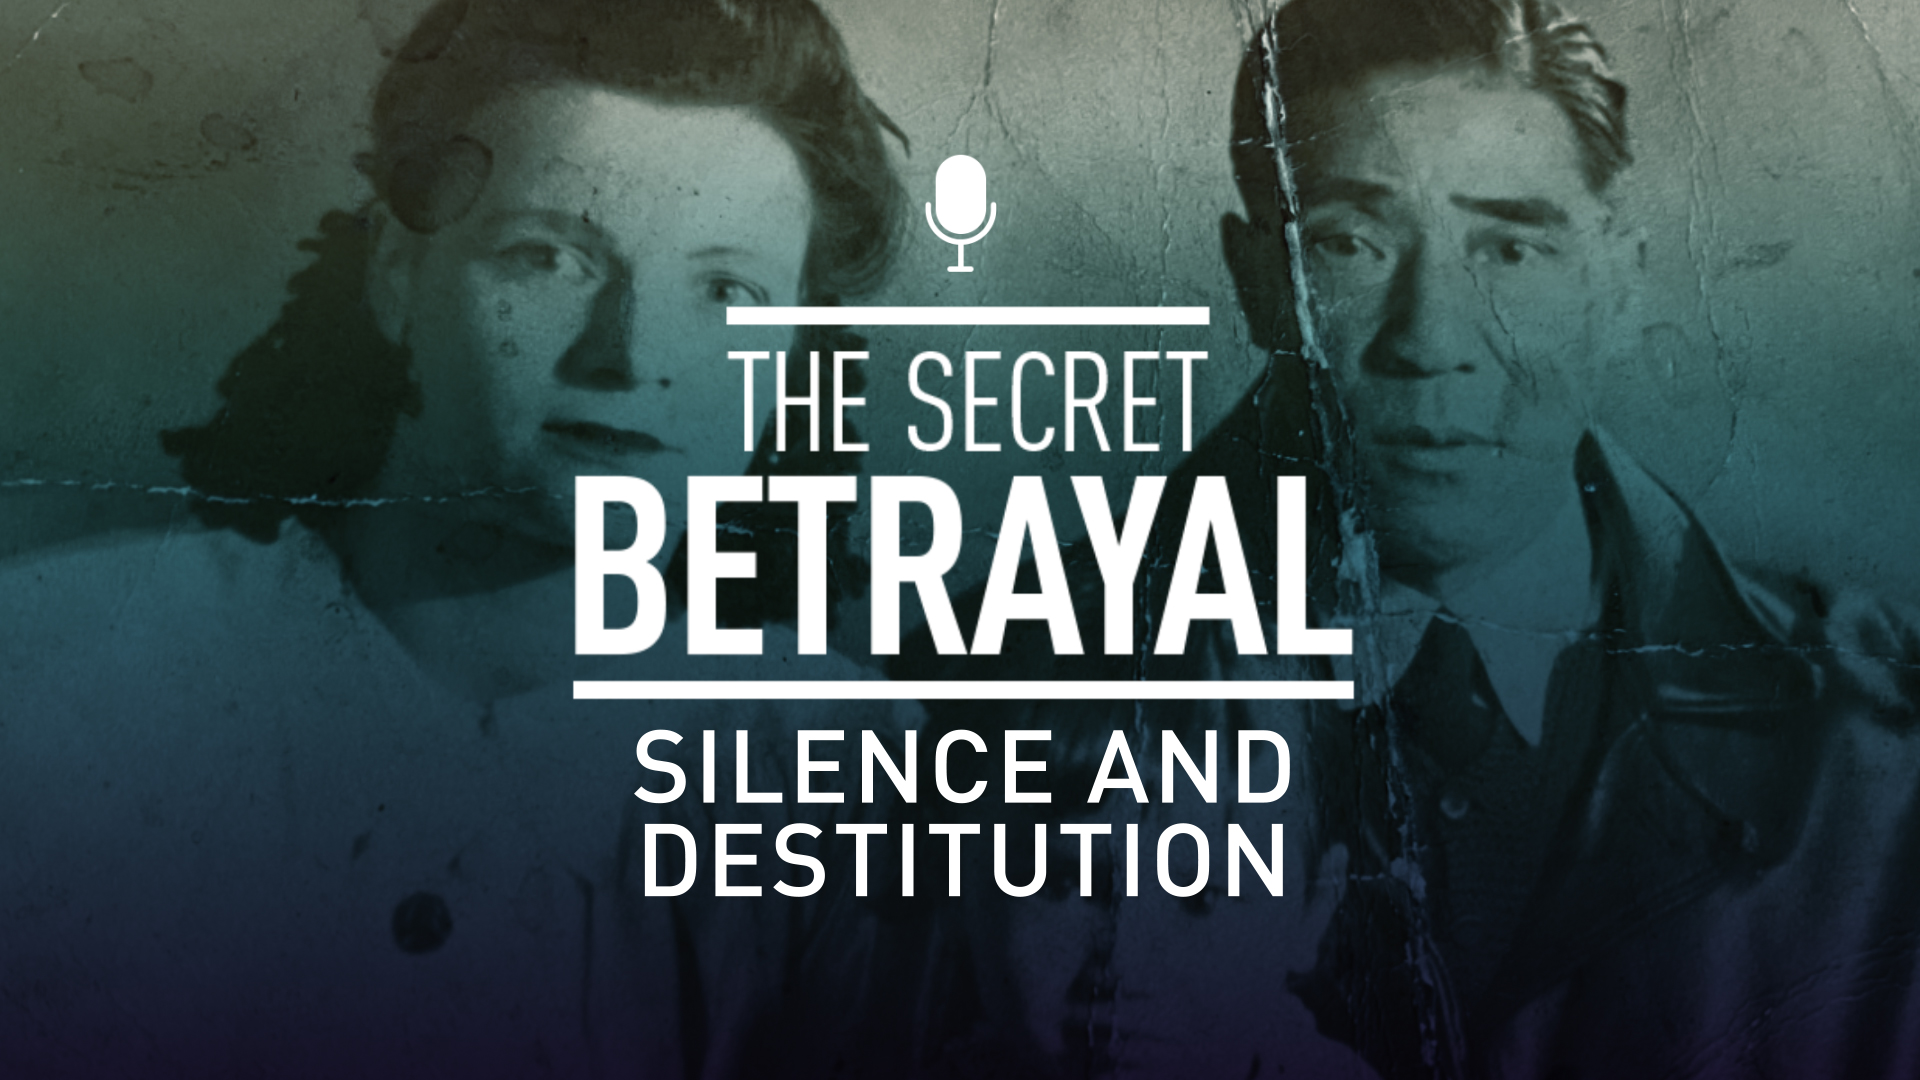 The Secret Betrayal podcast 2/3: Silence and destitution